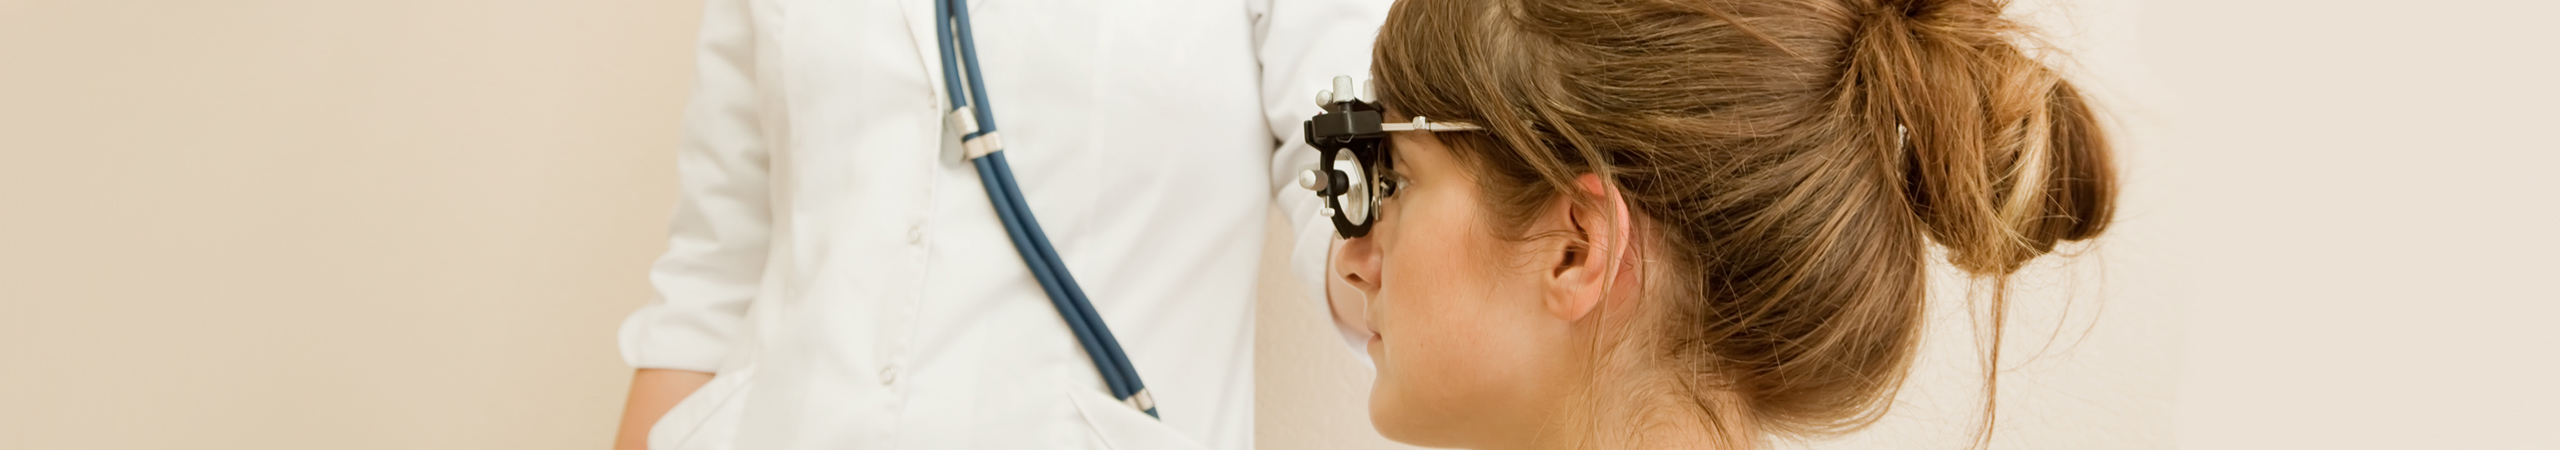 ophthalmologist  and patient testing  eyesight  in clinic